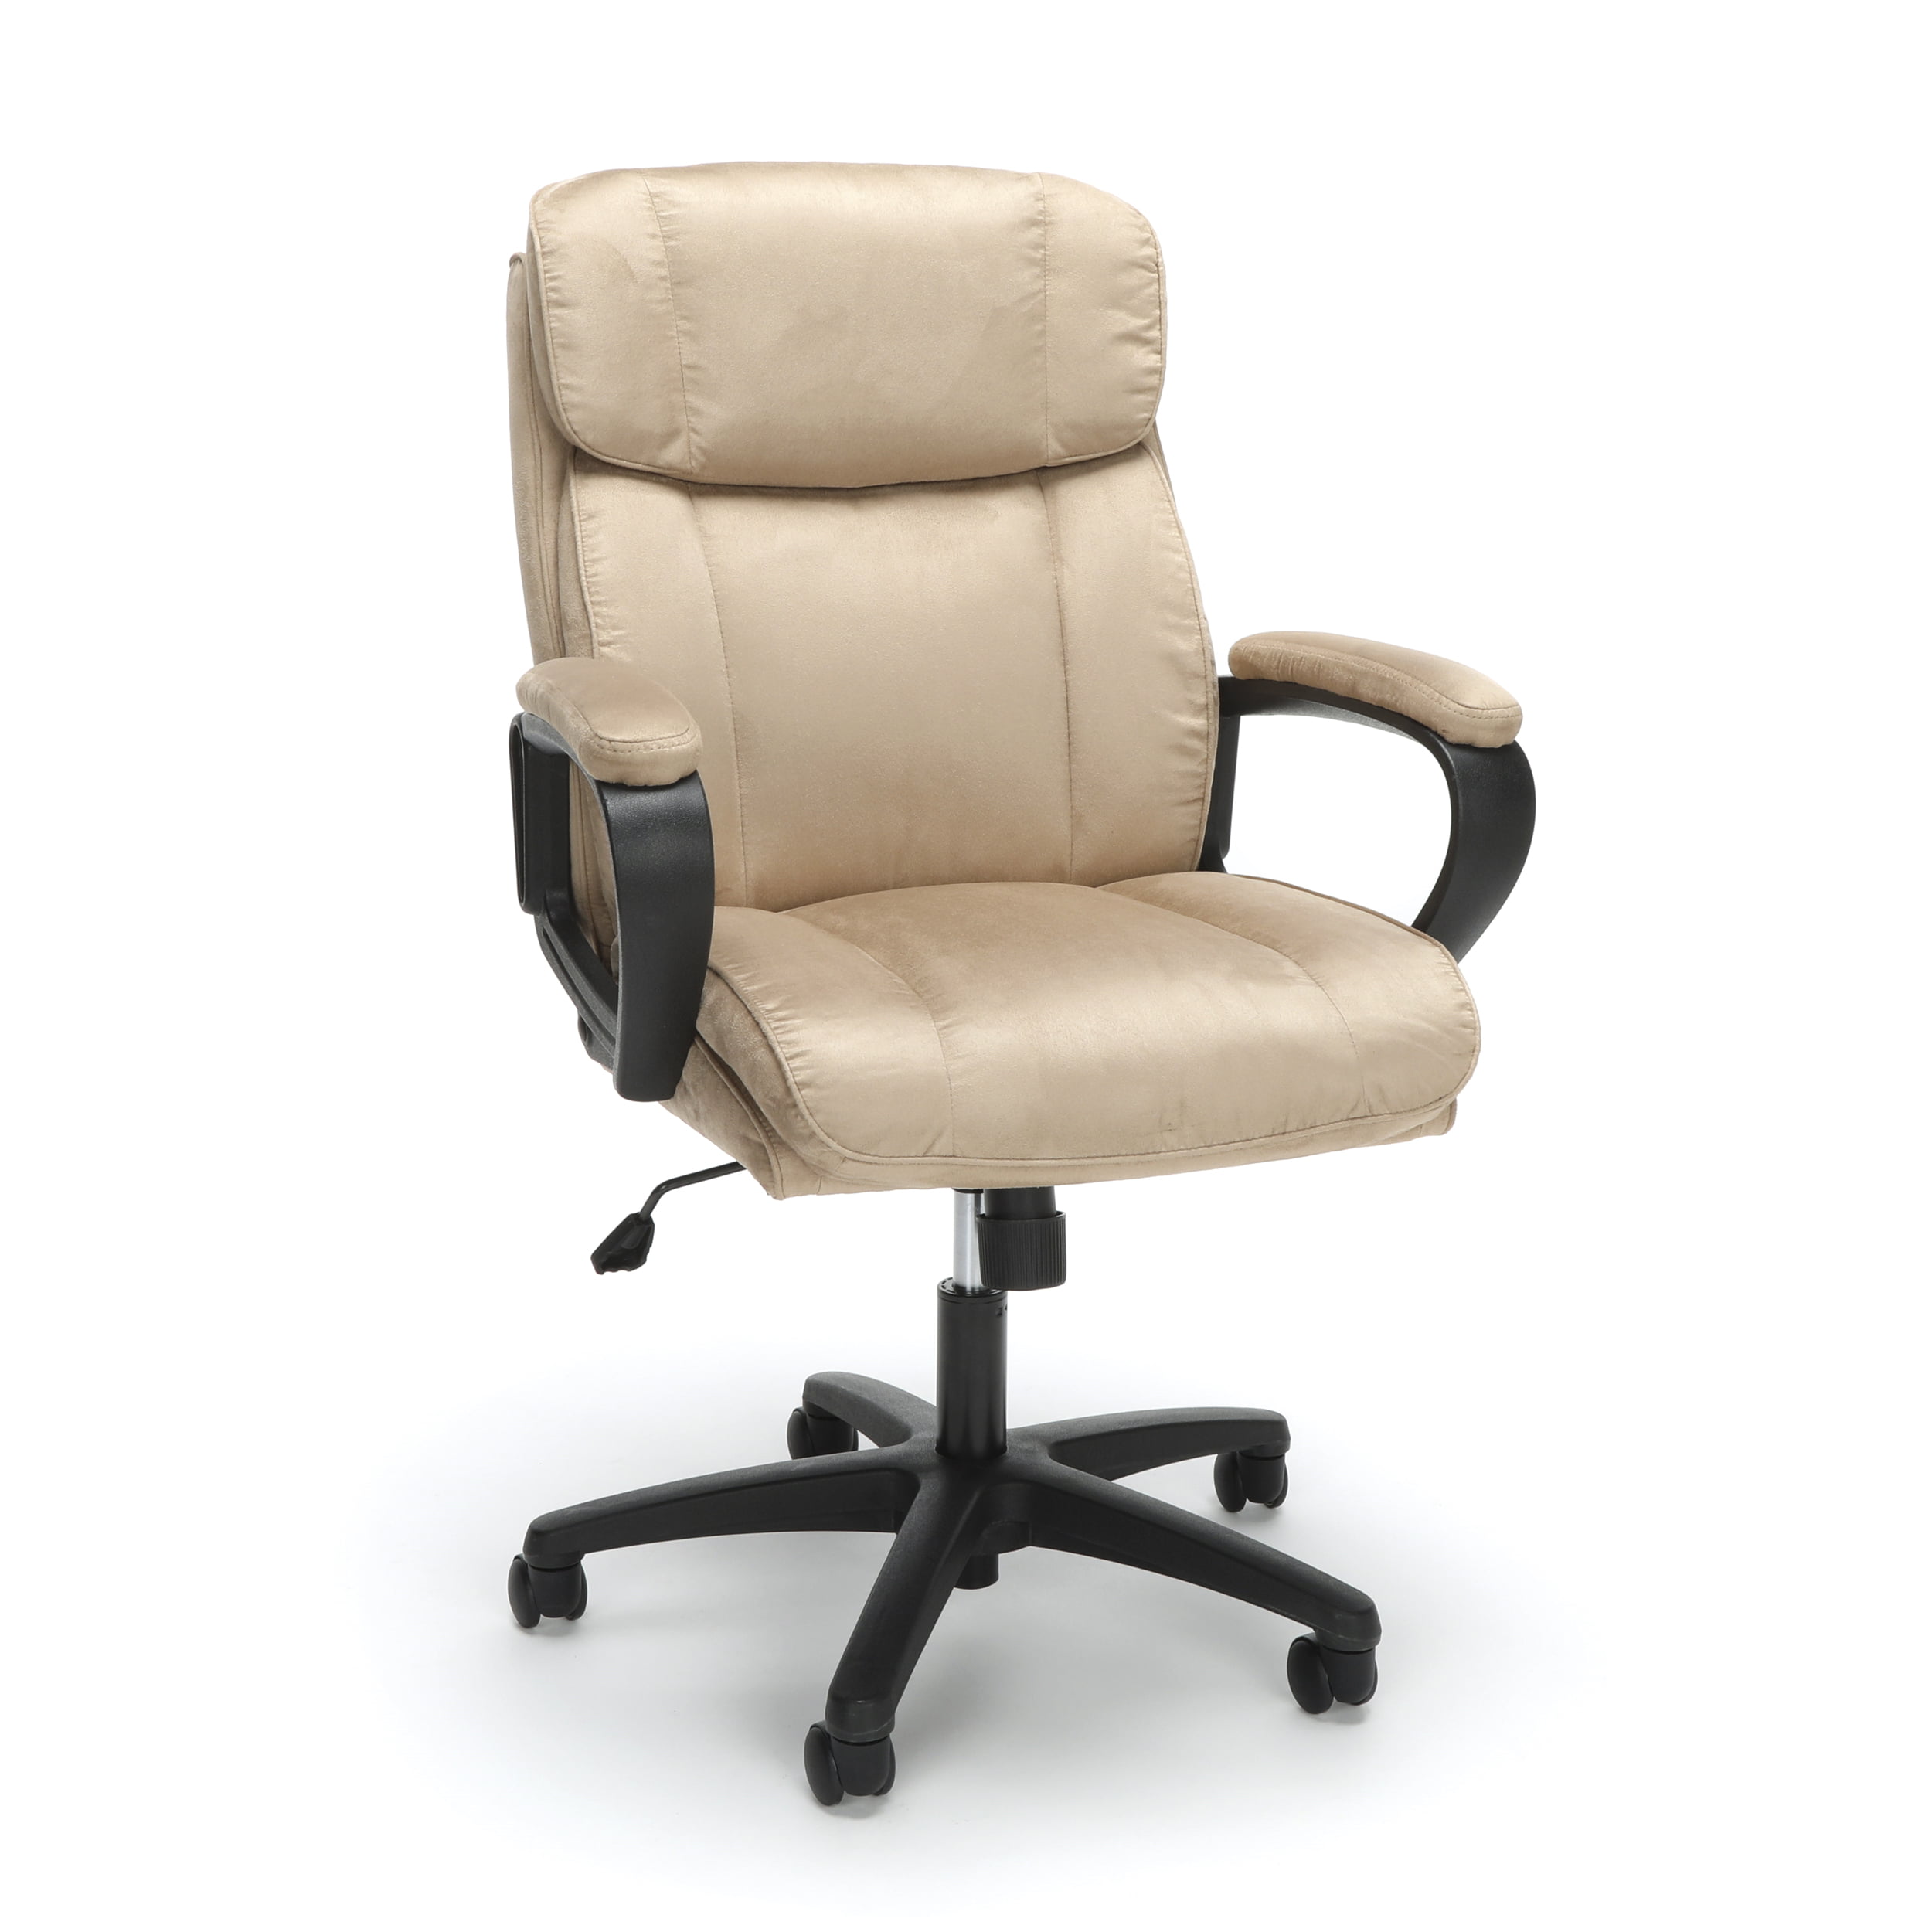 OFM Essentials Collection Plush Mid-Back Microfiber Office Chair, in Tan (ESS-3082-TAN